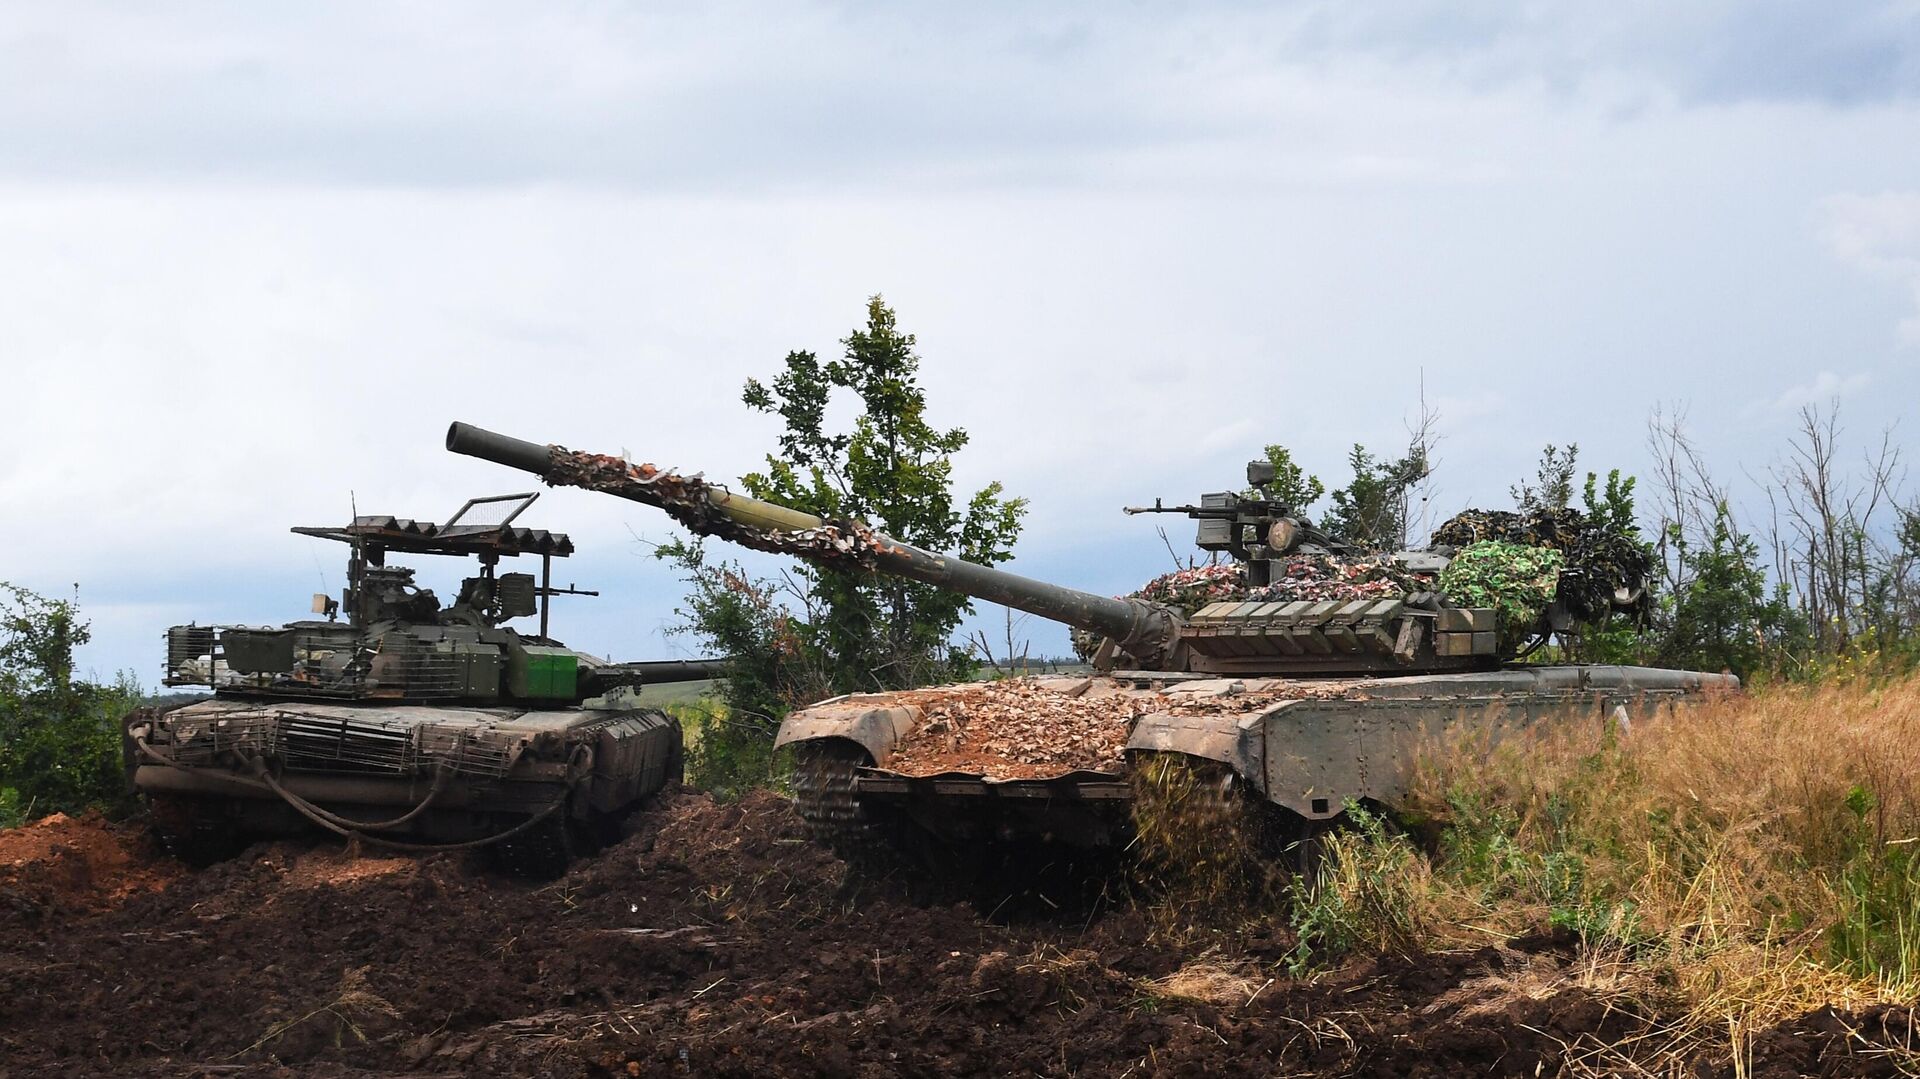 Customized T-80s from the 200-th Motorized Rifle Brigade of the Southern Group of Forces in the special operation zone near Soledar, Donetsk, June 2023. - Sputnik भारत, 1920, 18.09.2023